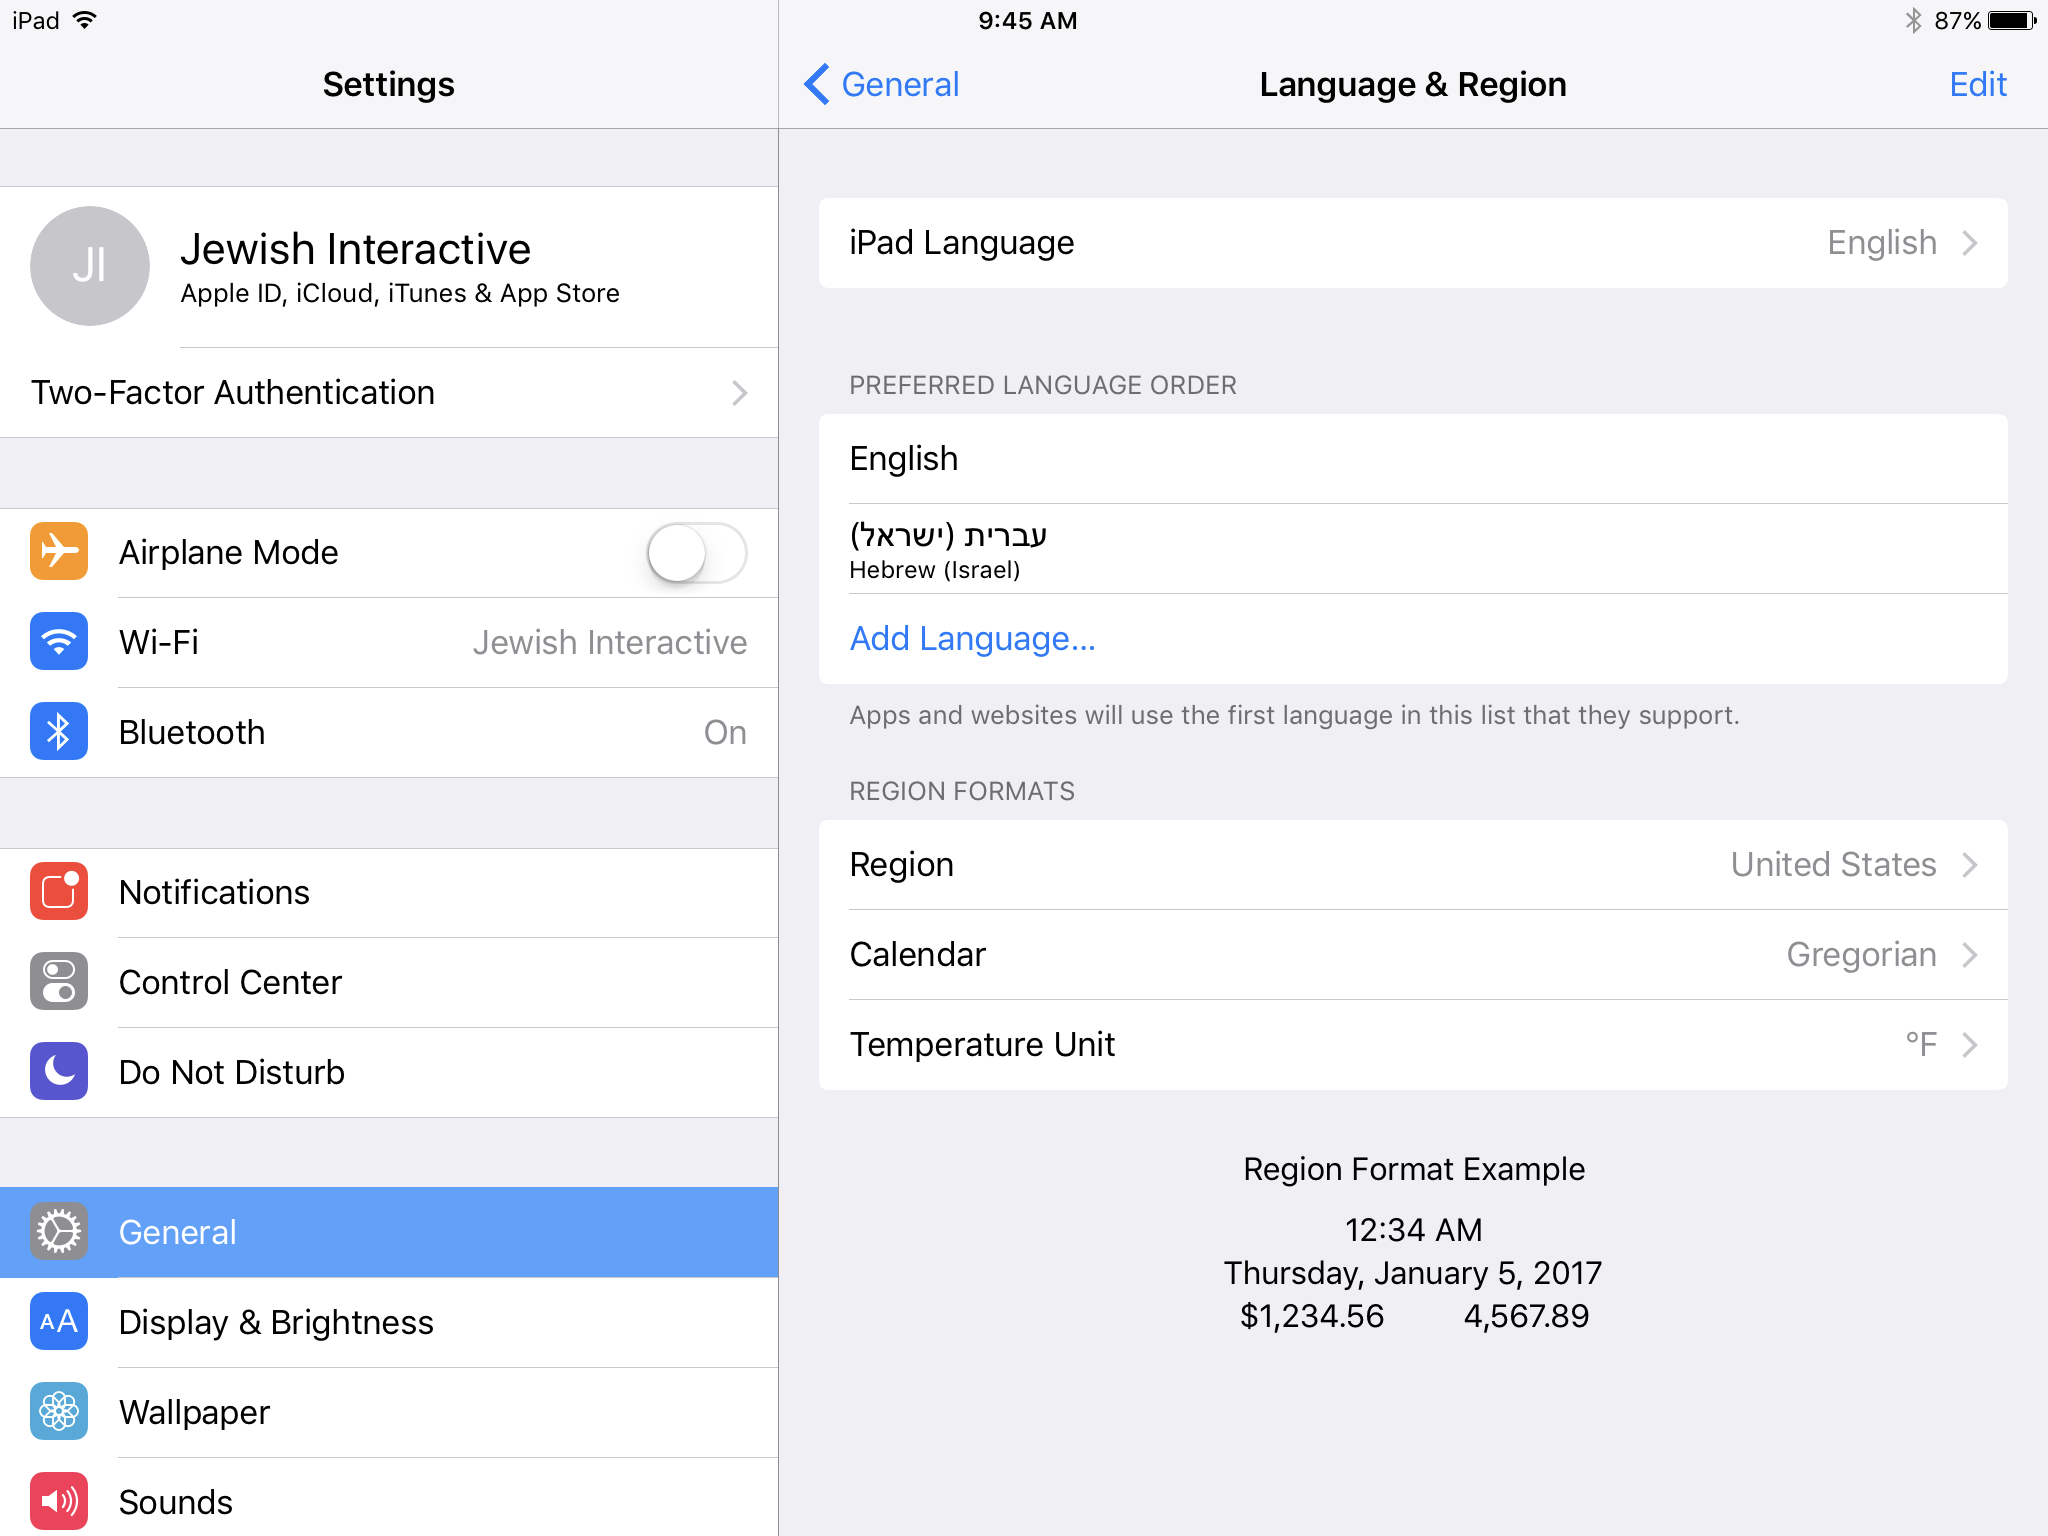 iPad settings for Hebrew interface